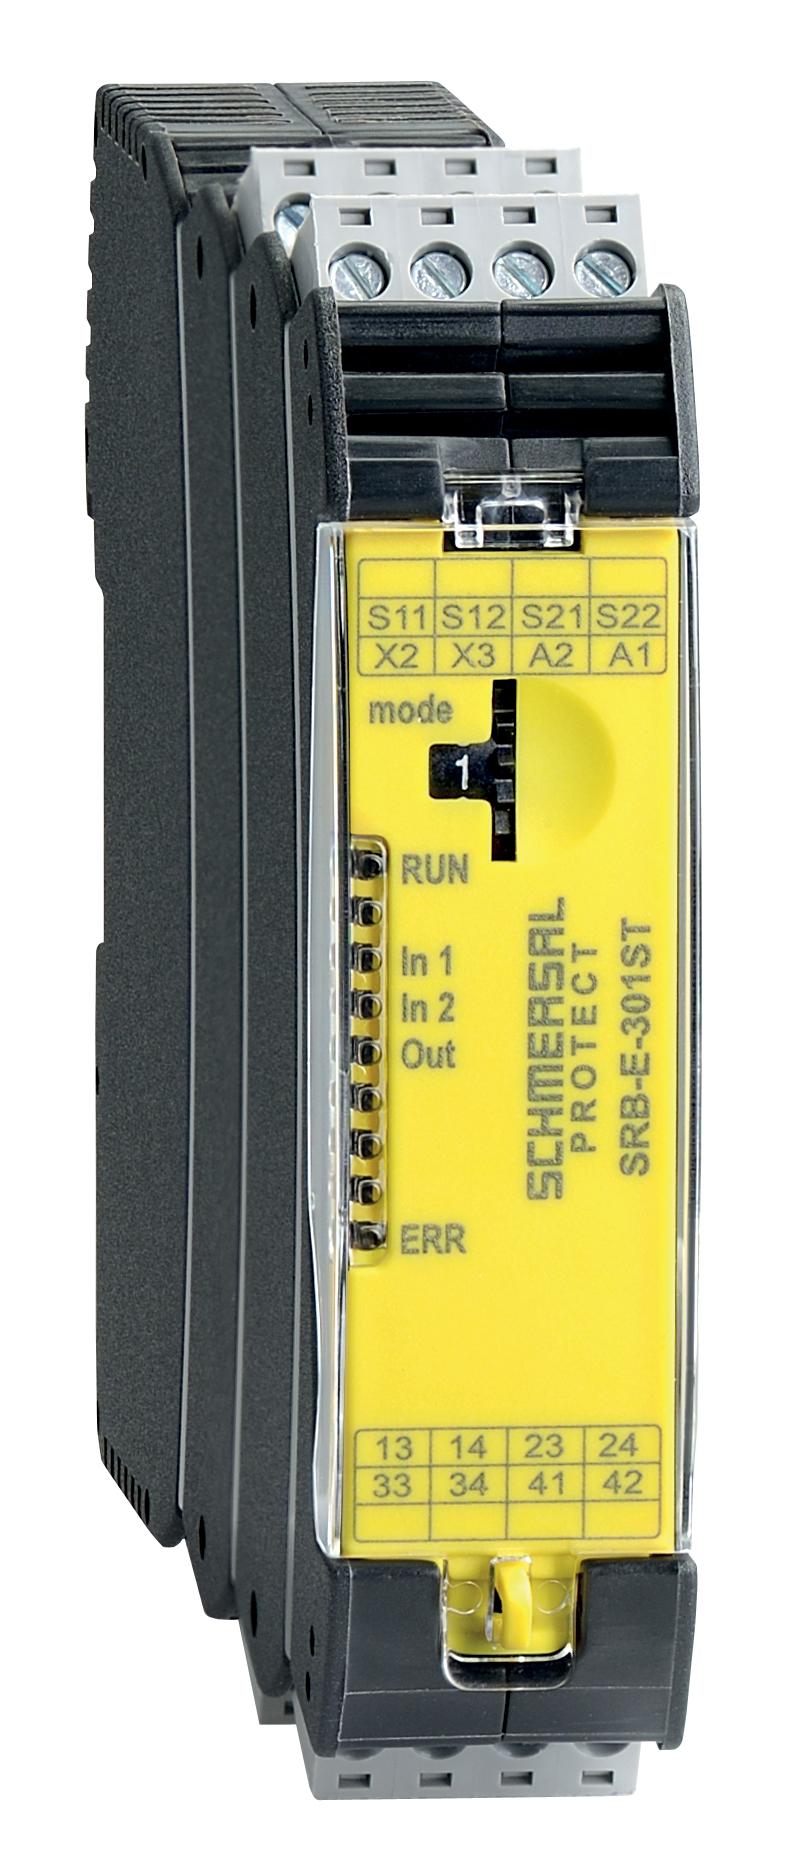 Schmersal SRB-E-301ST Safety-related tactile sensor; Plug-in screw terminals with coding; STOP 0 Function; 1 oder 2-channel control; Start button / Auto-start; 1 Auxiliary contact; 3 safety contacts